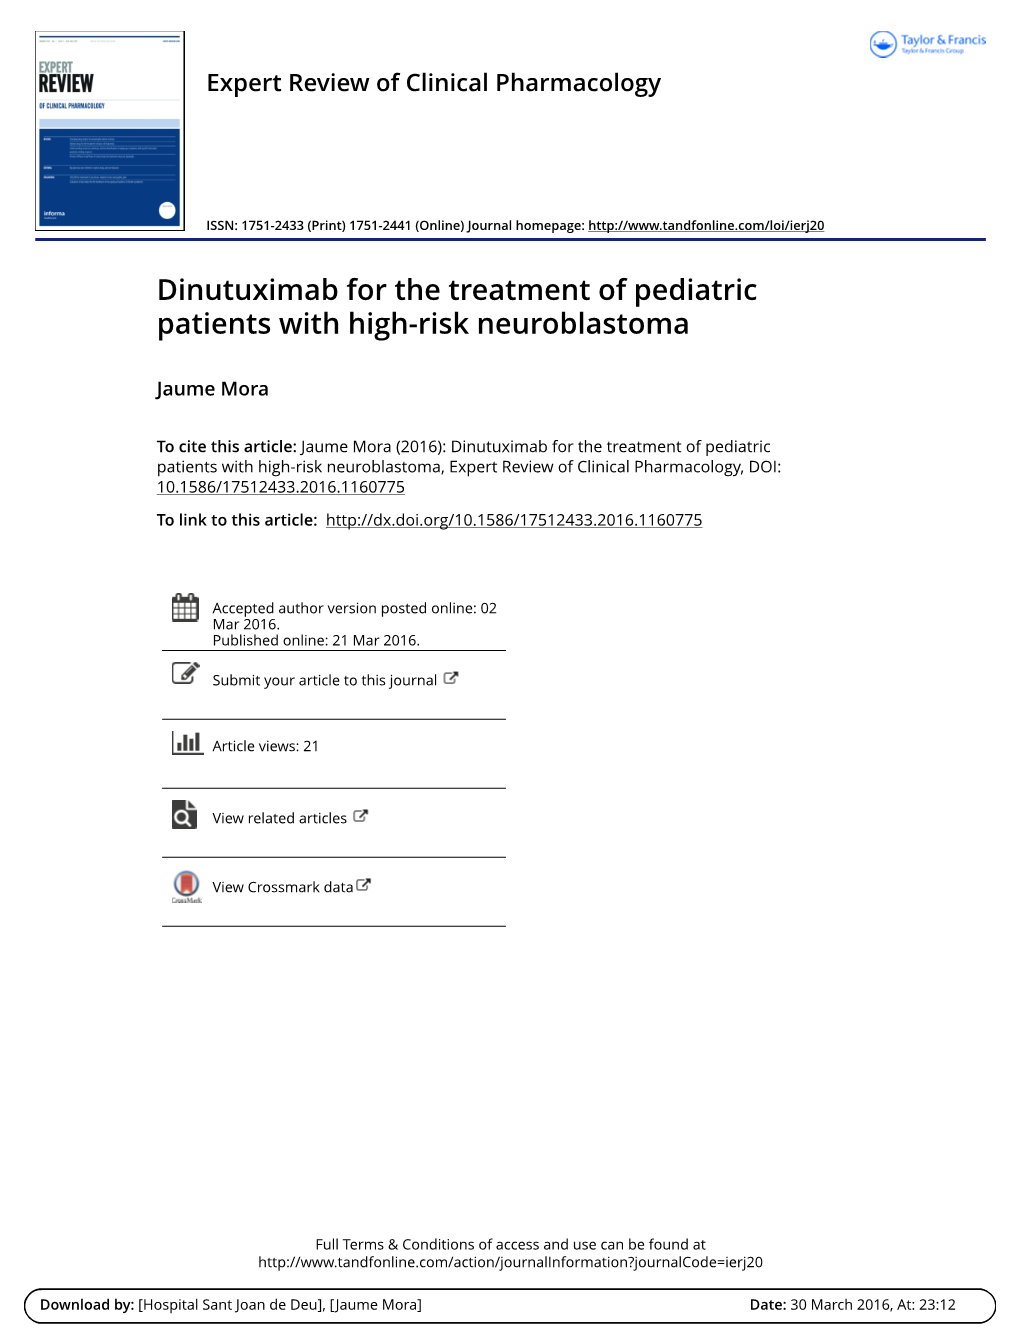 Dinutuximab for the Treatment of Pediatric Patients with High-Risk Neuroblastoma